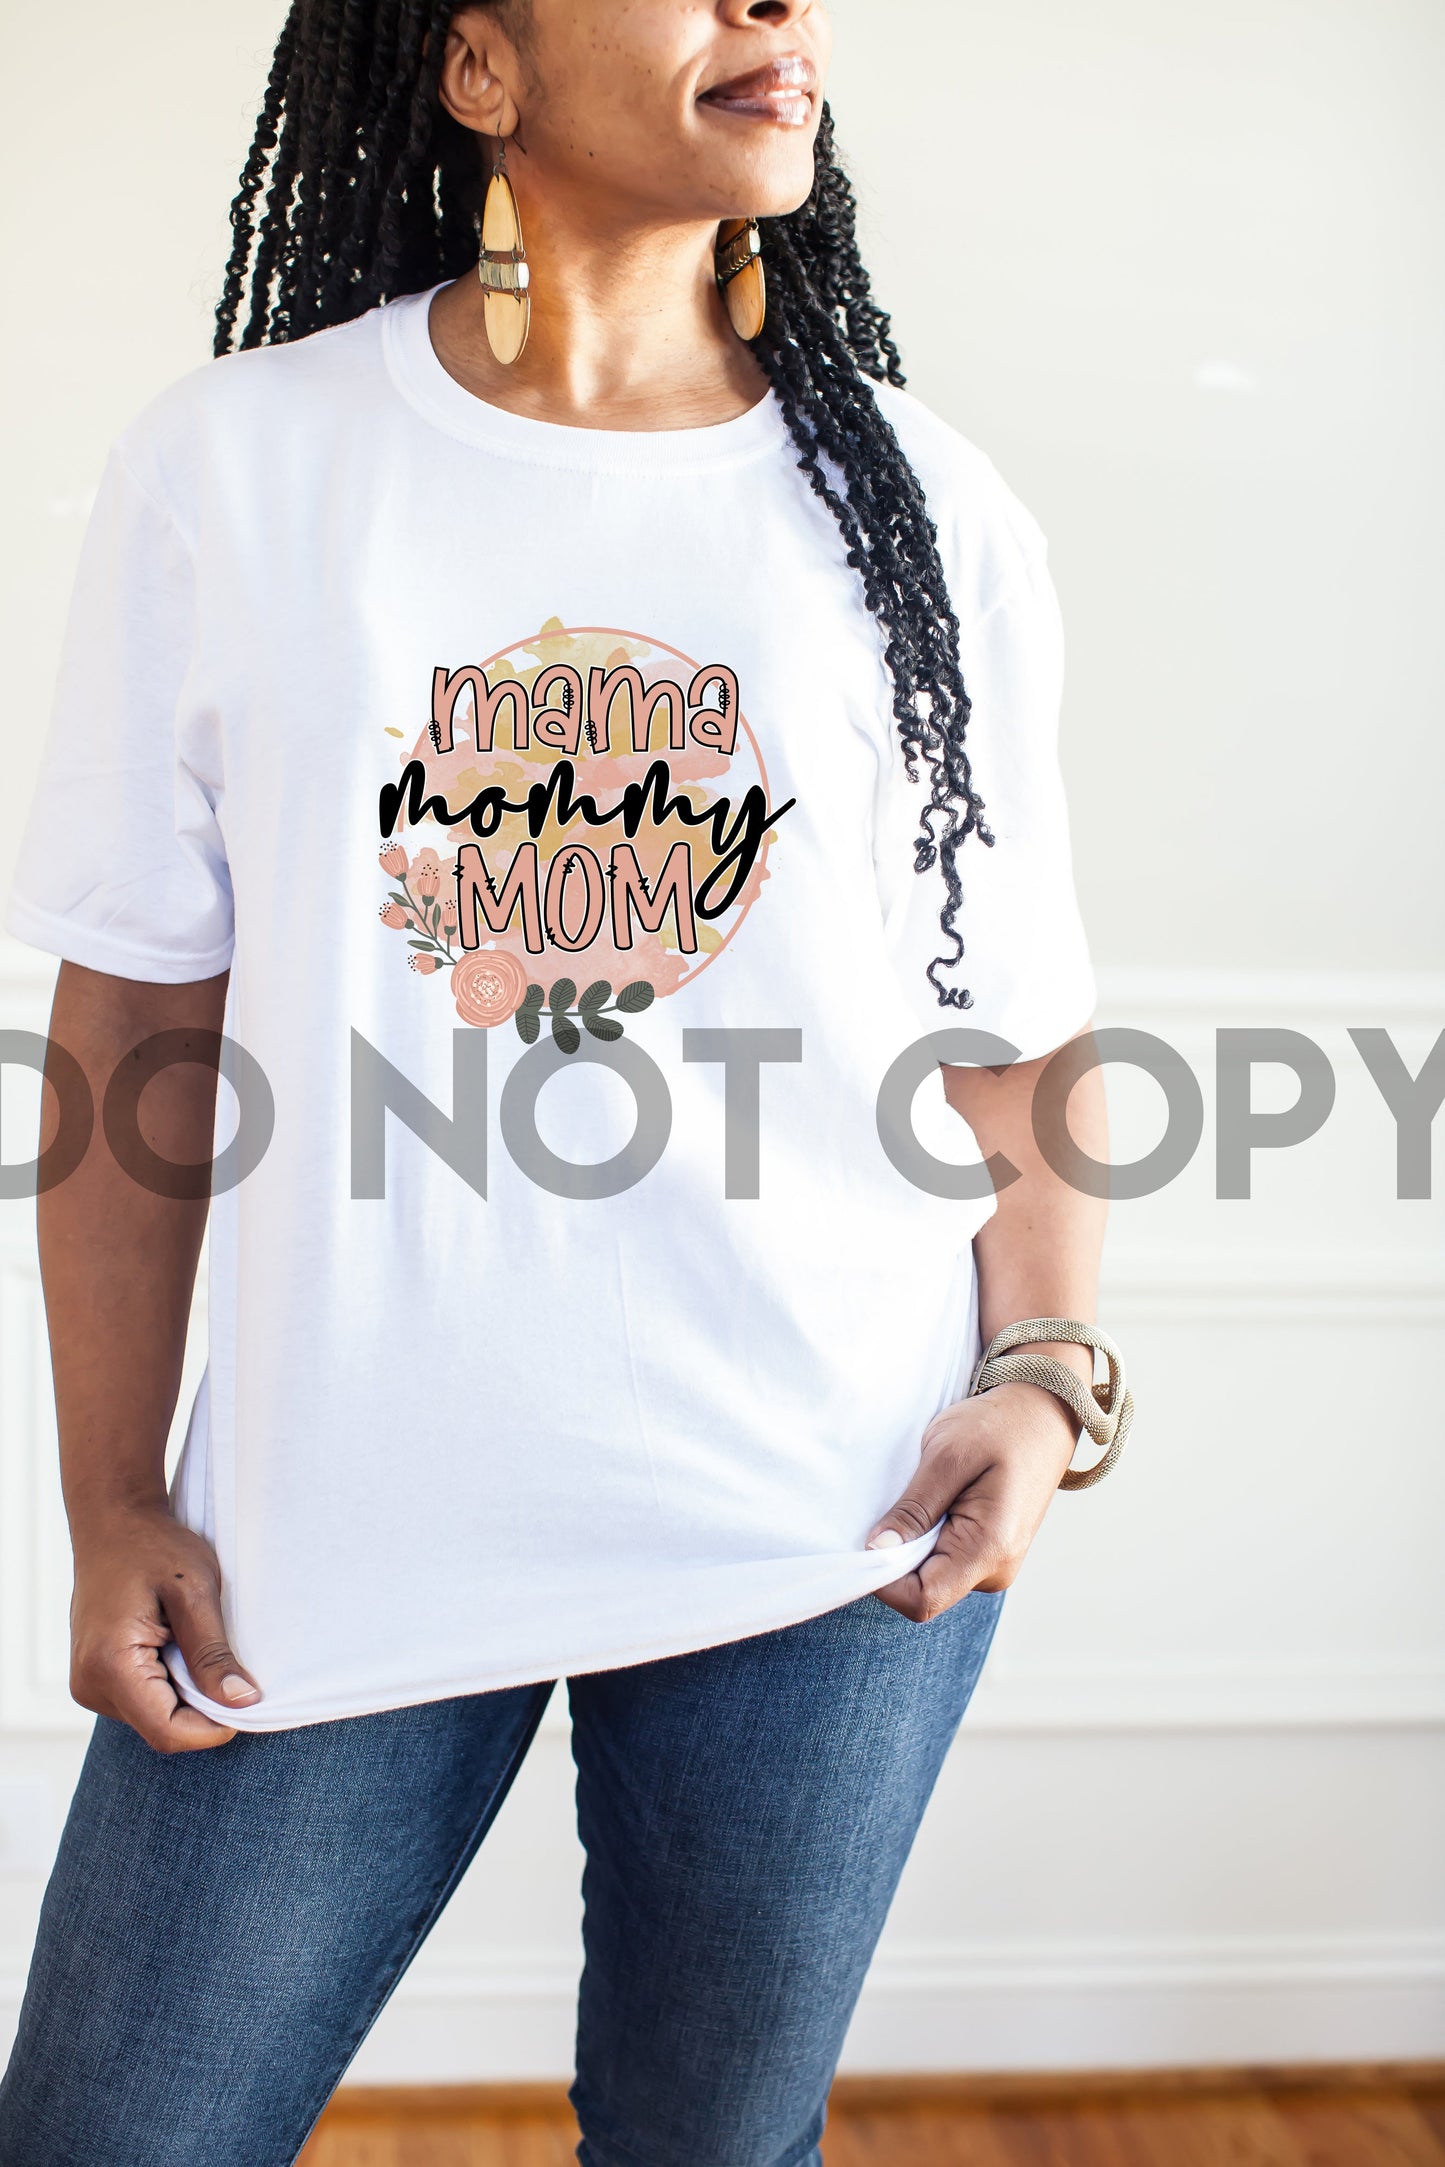 Mama Mommy Mom Pink Gold BG Dream Print or Sublimation Print